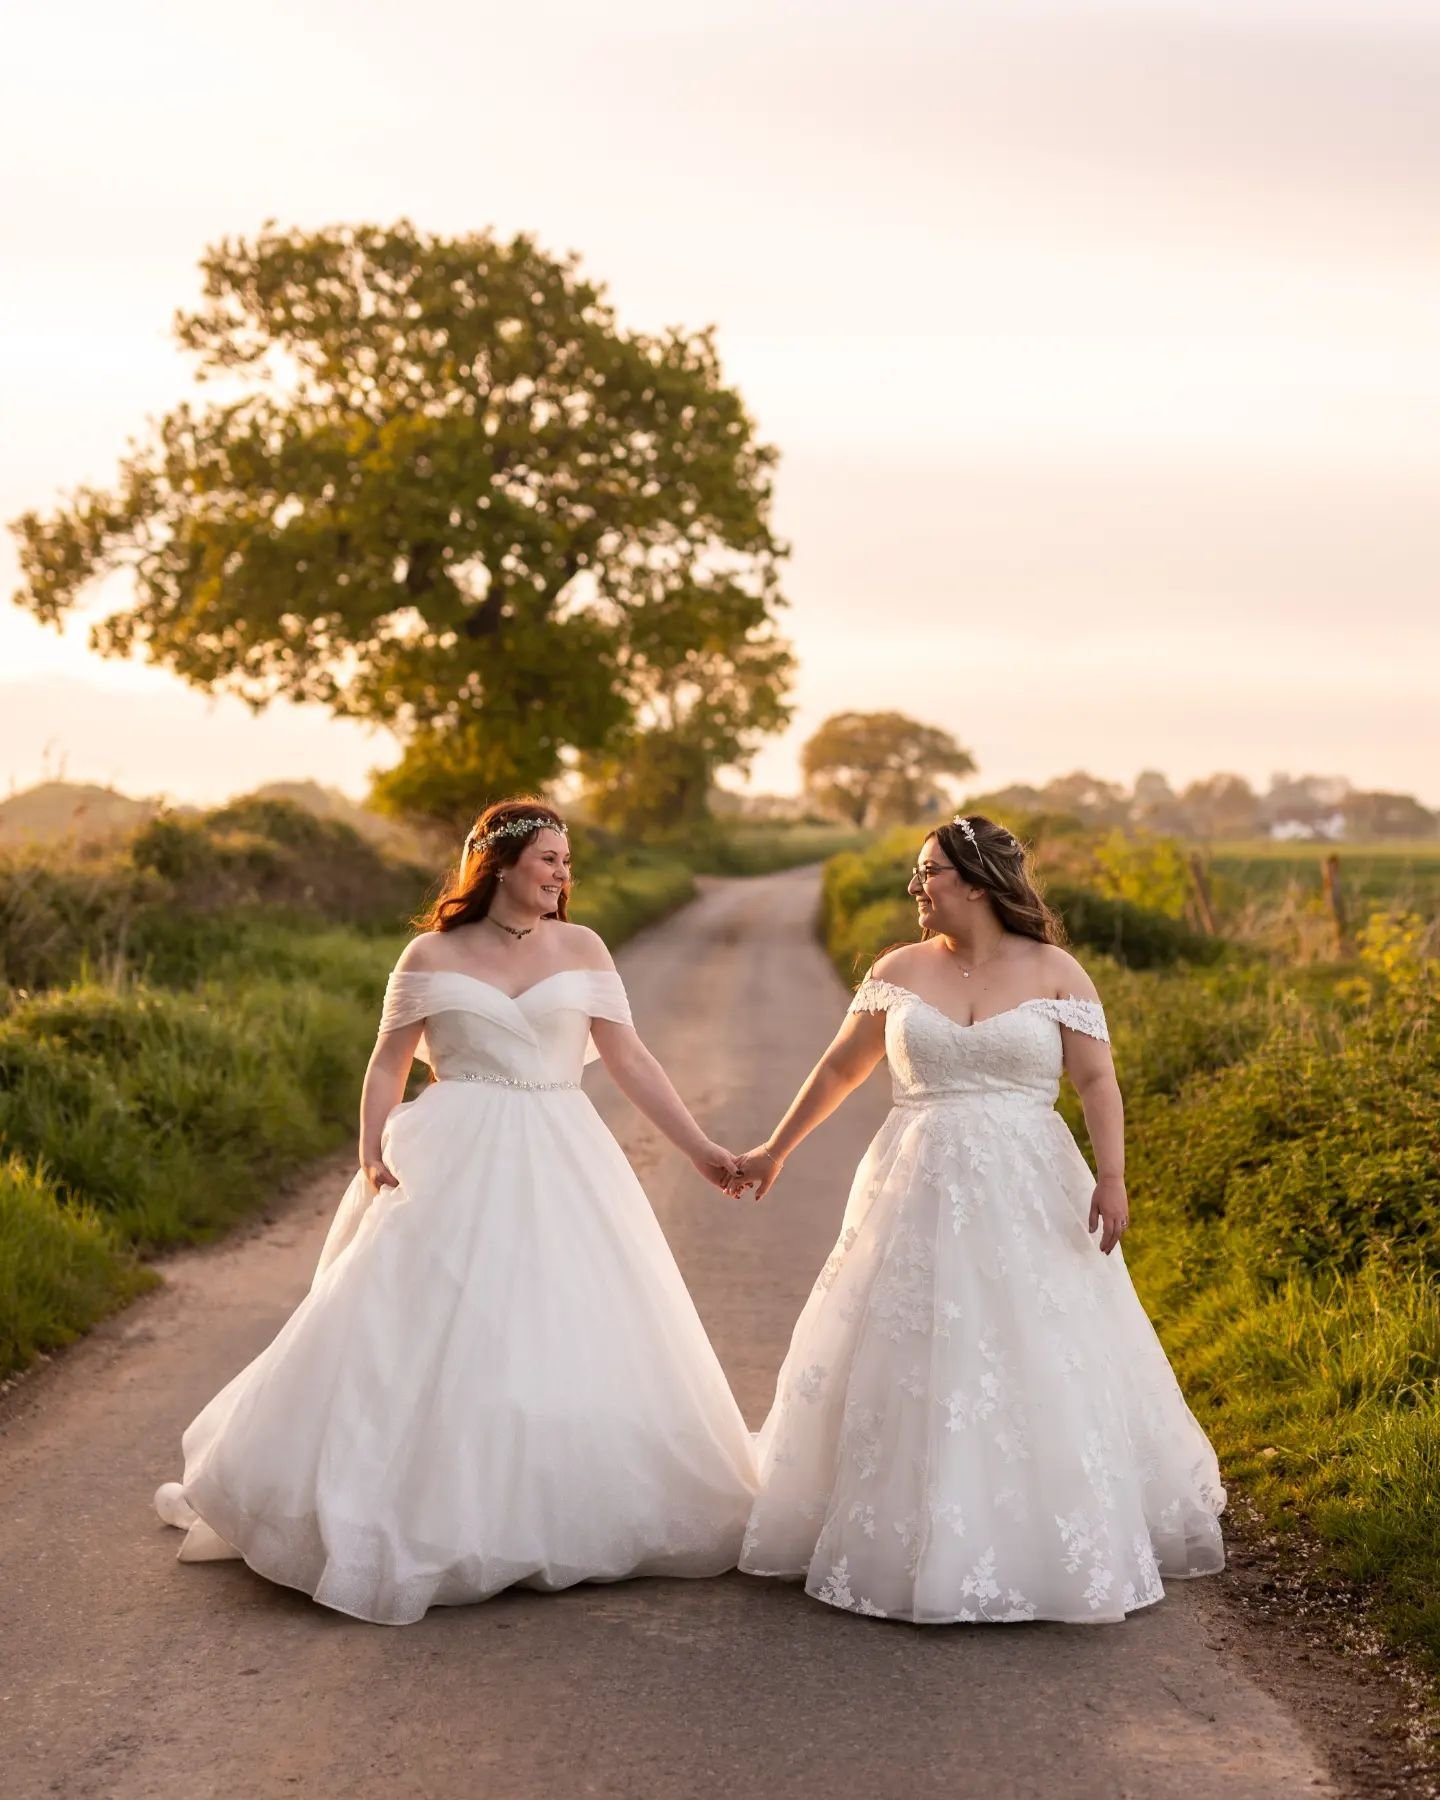 Congratulations Stacey &amp; Beth, who tied the knot on Saturday at the beautiful @dairybarnsweddings surrounded by their loved ones! It was such a stunning day with amazing weather (just look at that golden hour light!) and I'm so happy for this won